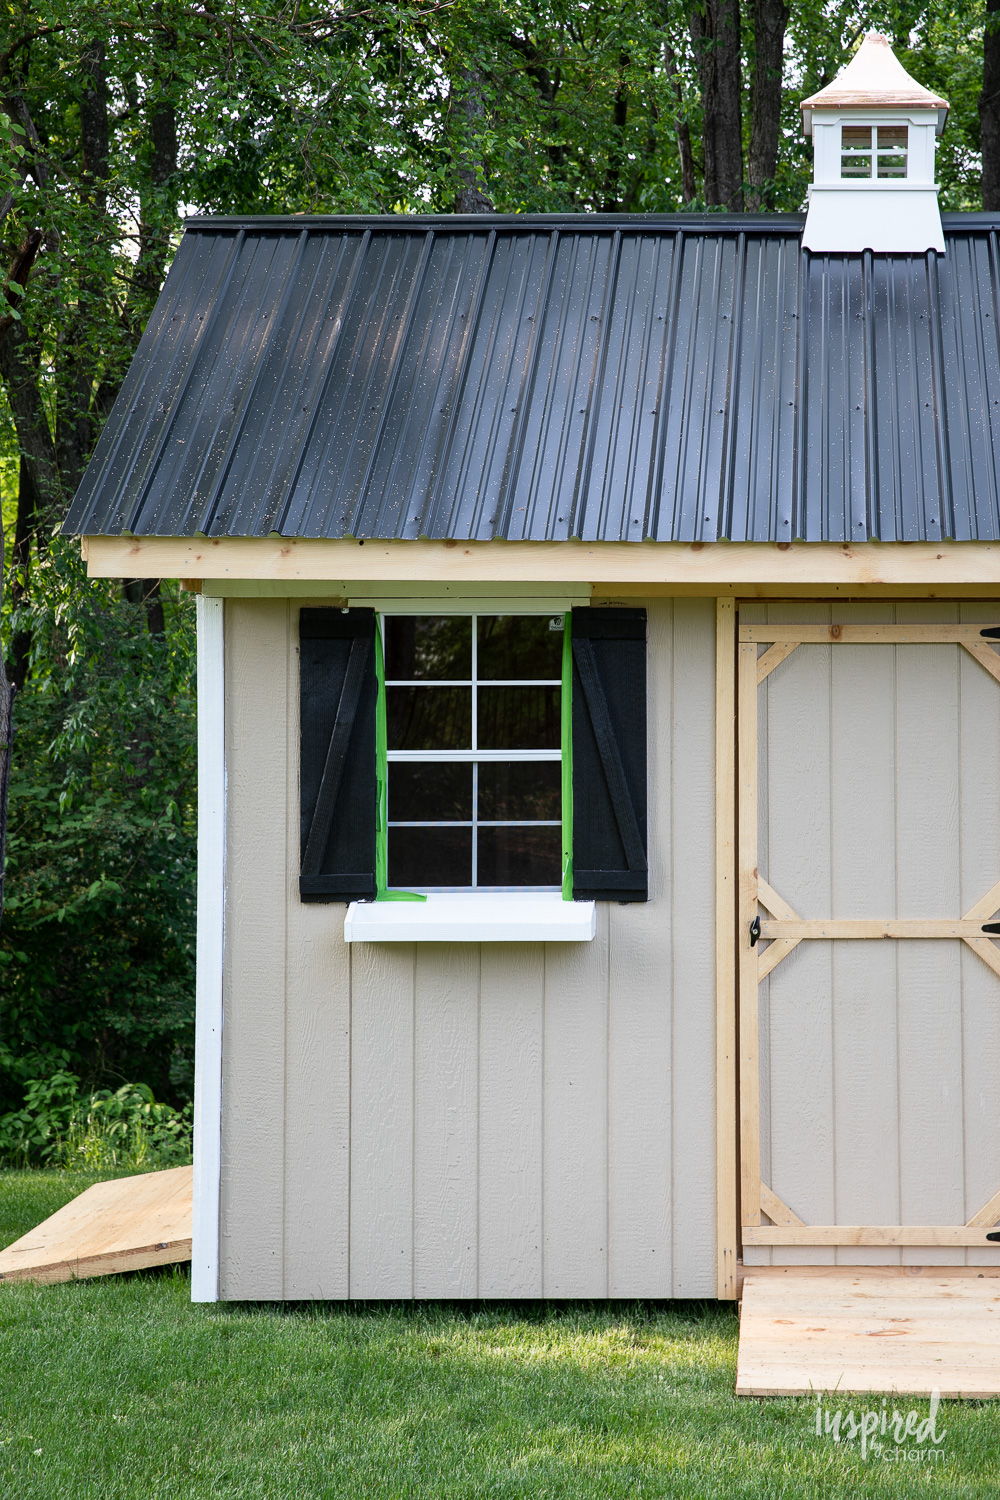 tan shed with black shutters and roof with white trim.